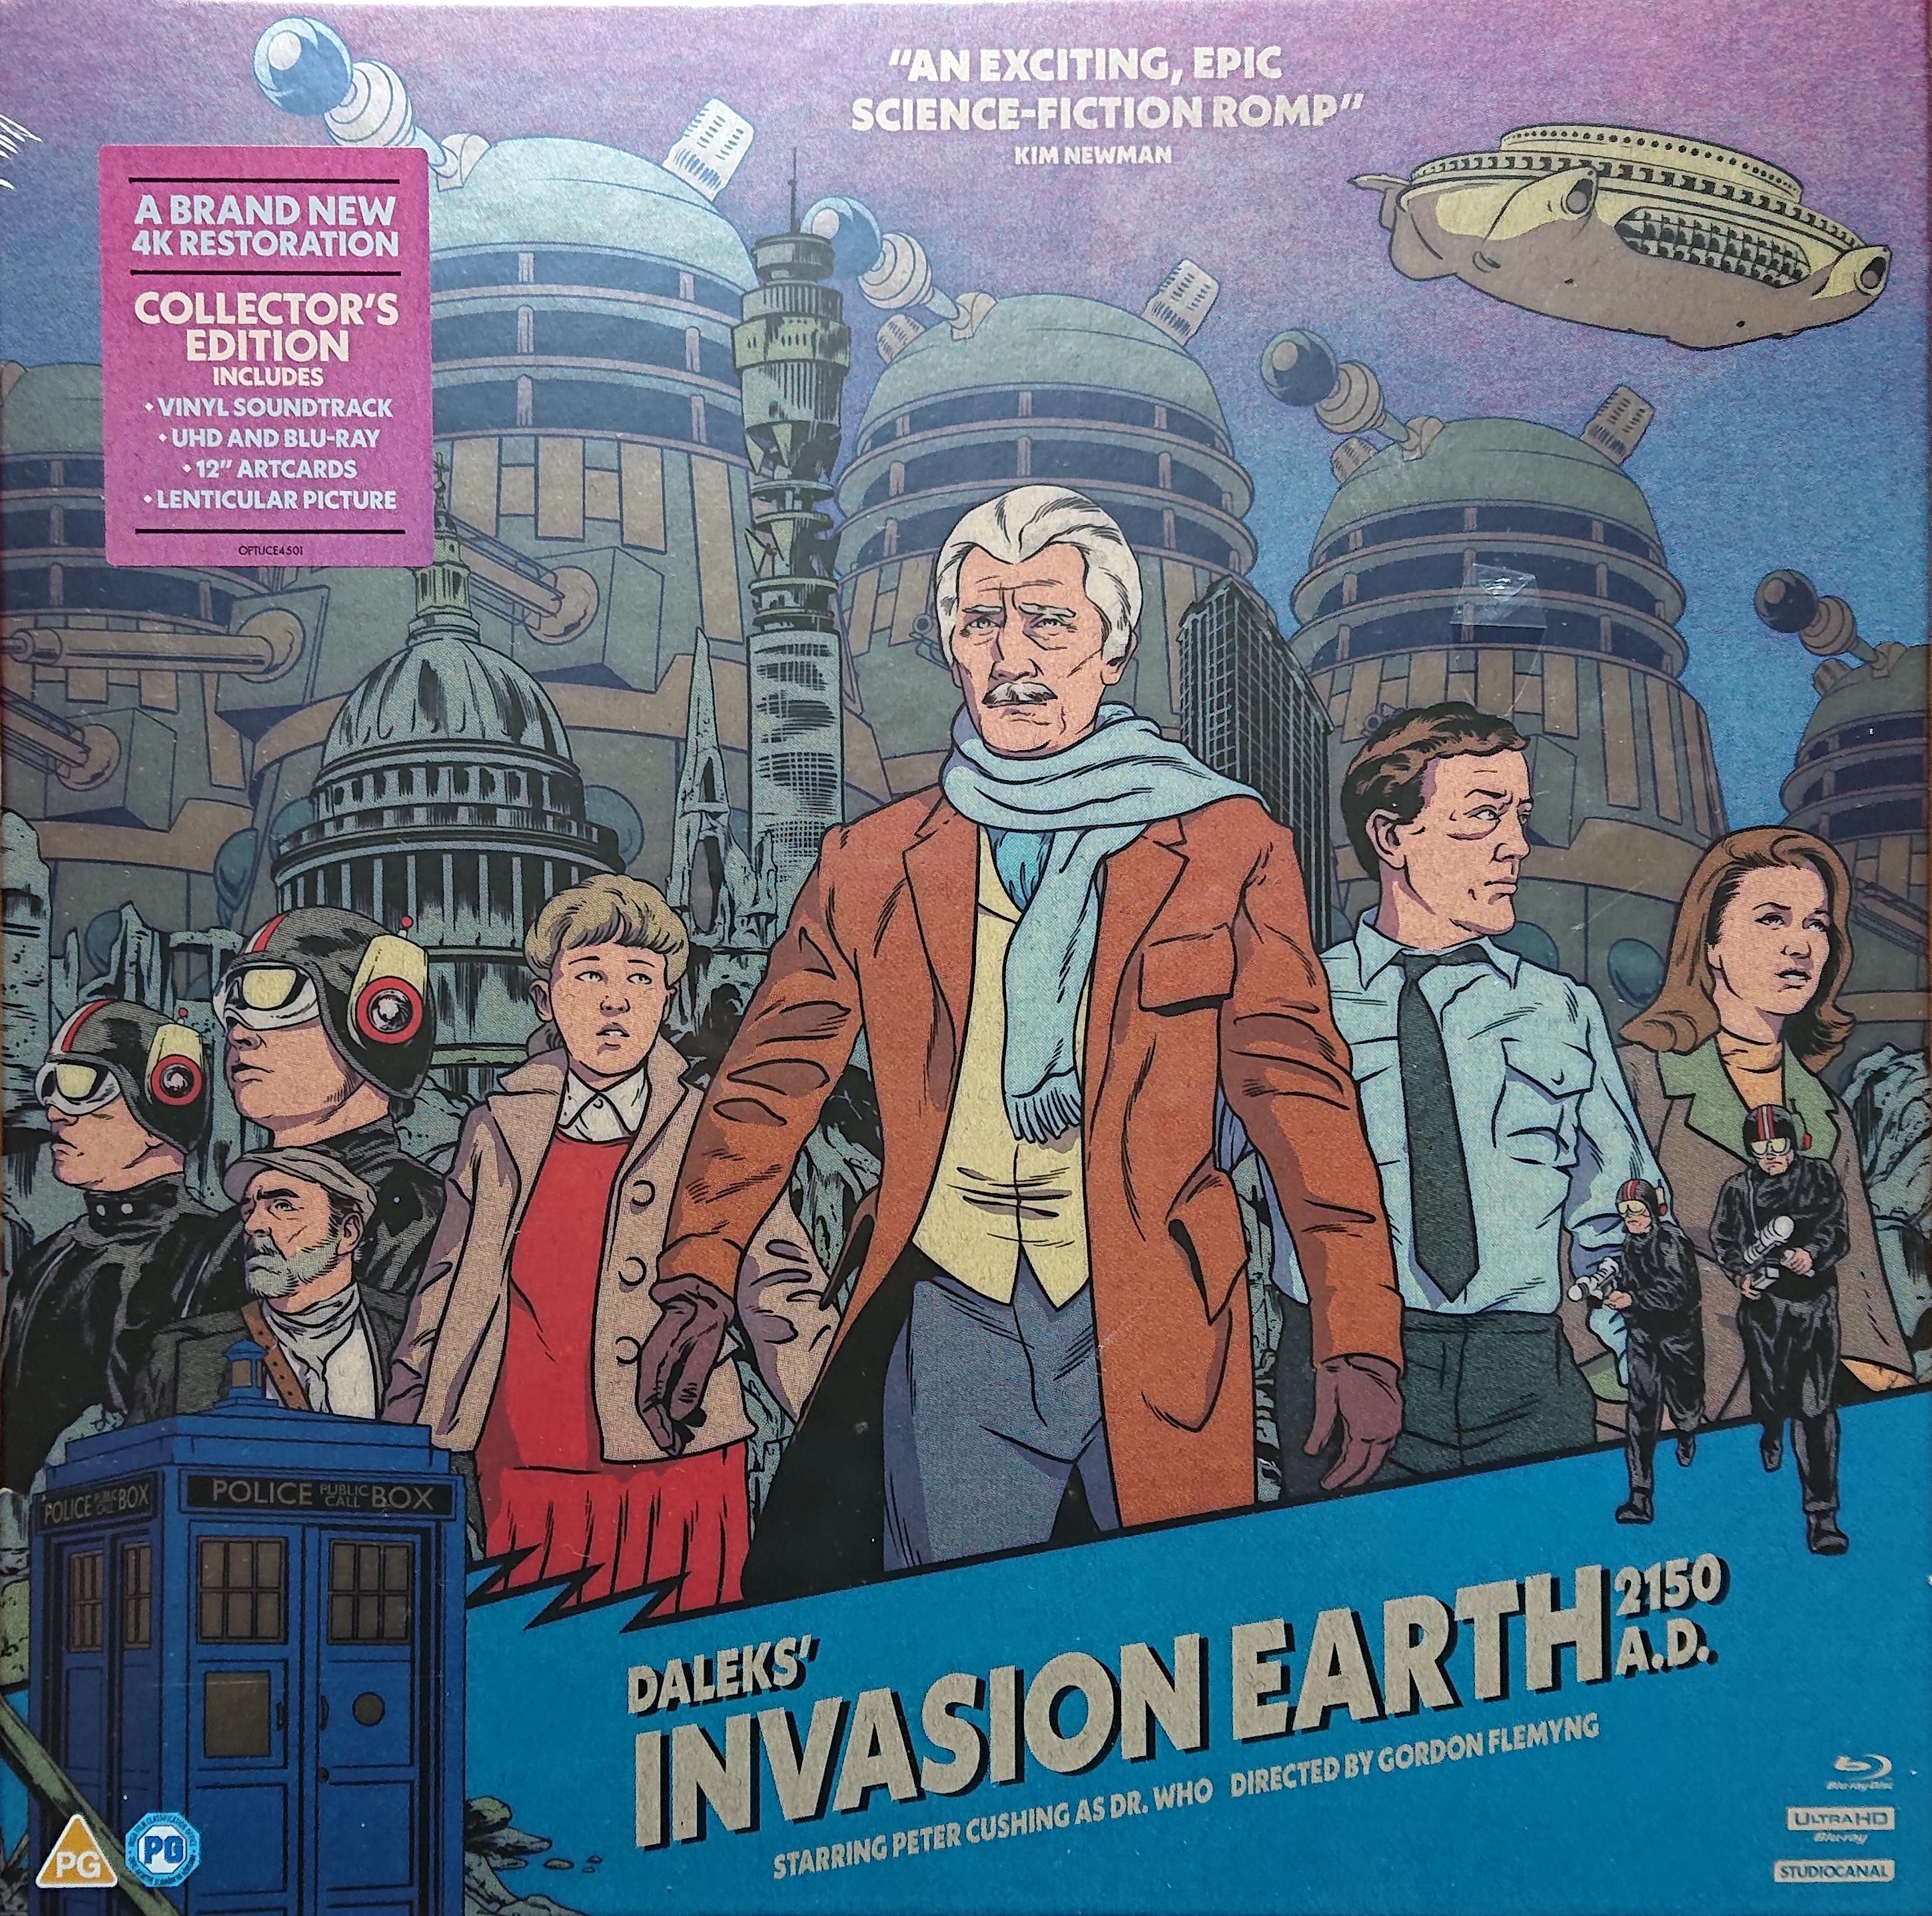 Picture of OPTUCE 4501 Dr. Who Daleks\' invasion Earth 2150AD by artist Terry Nation / Milton Subotsky from the BBC records and Tapes library